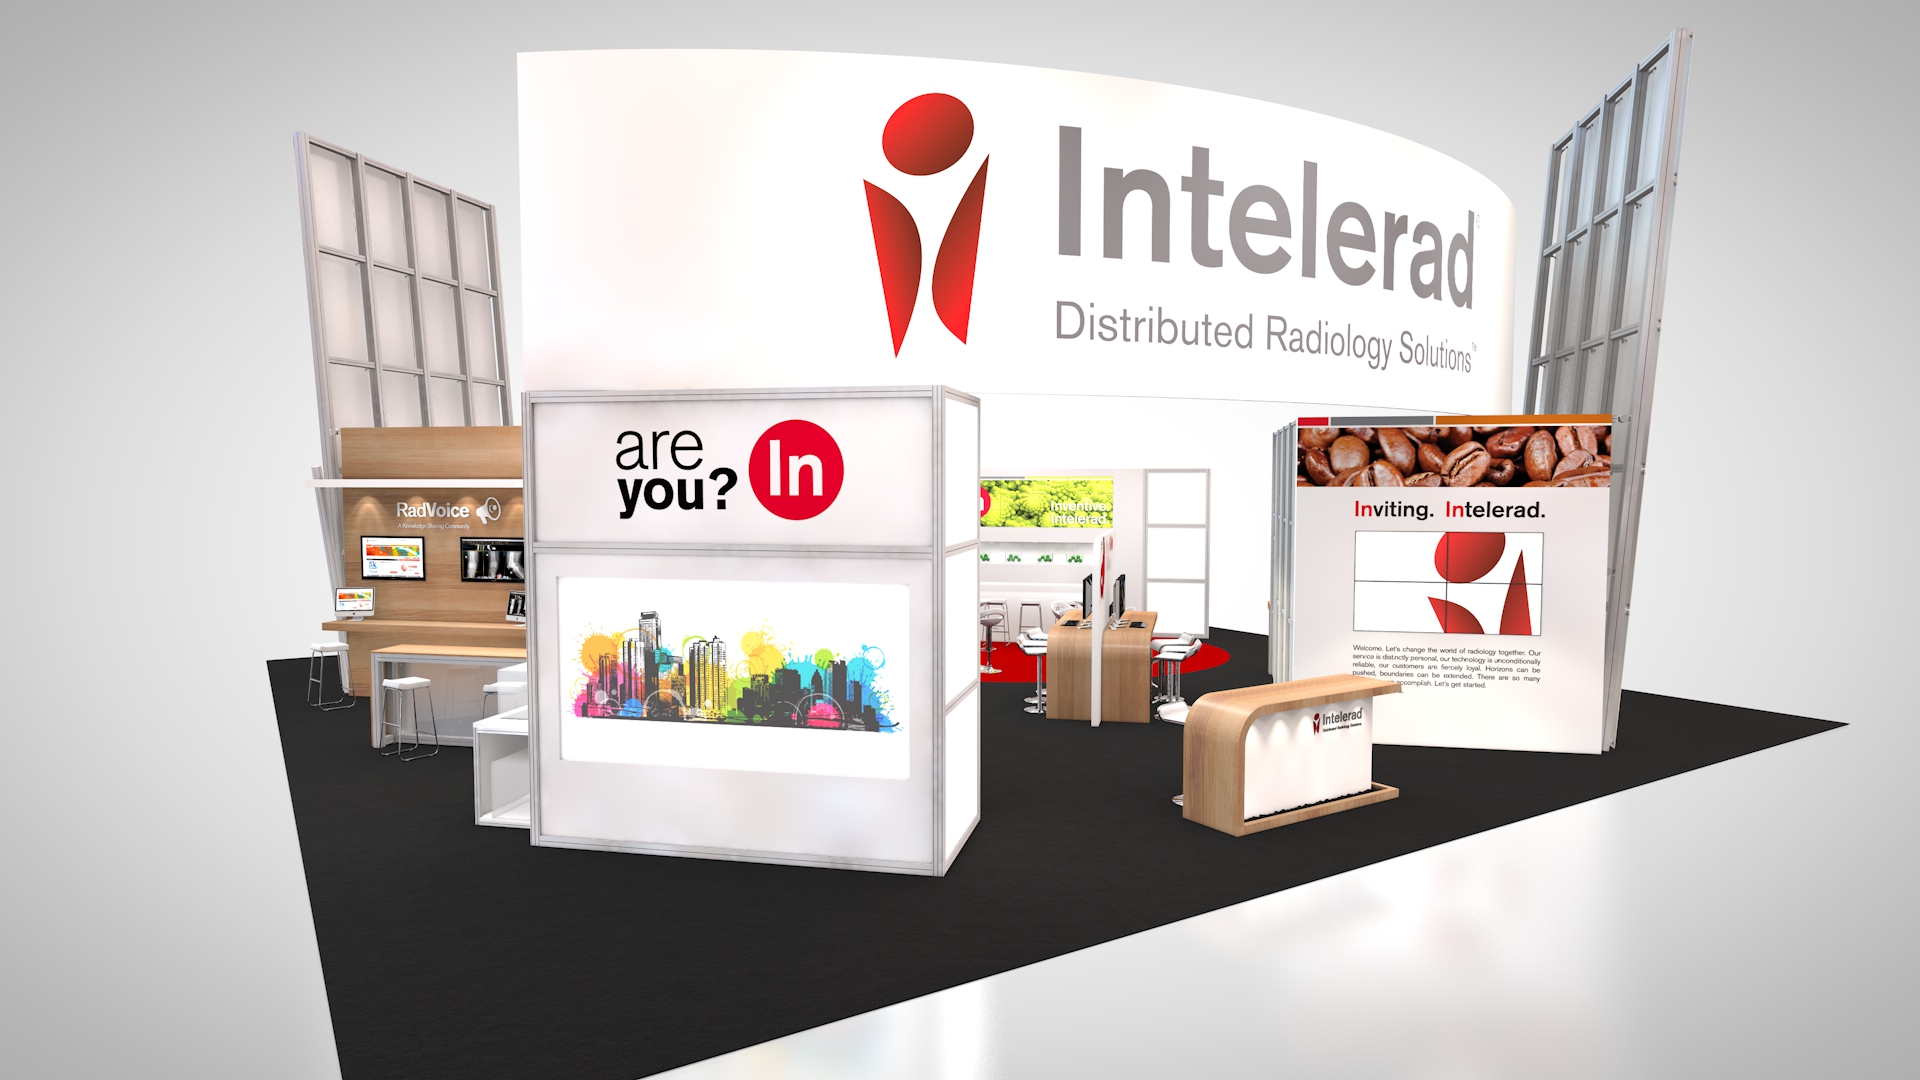 Intelerad's trade show booth rental incorporates custom workstations, fabric banners, digital graphics and interactive multimedia